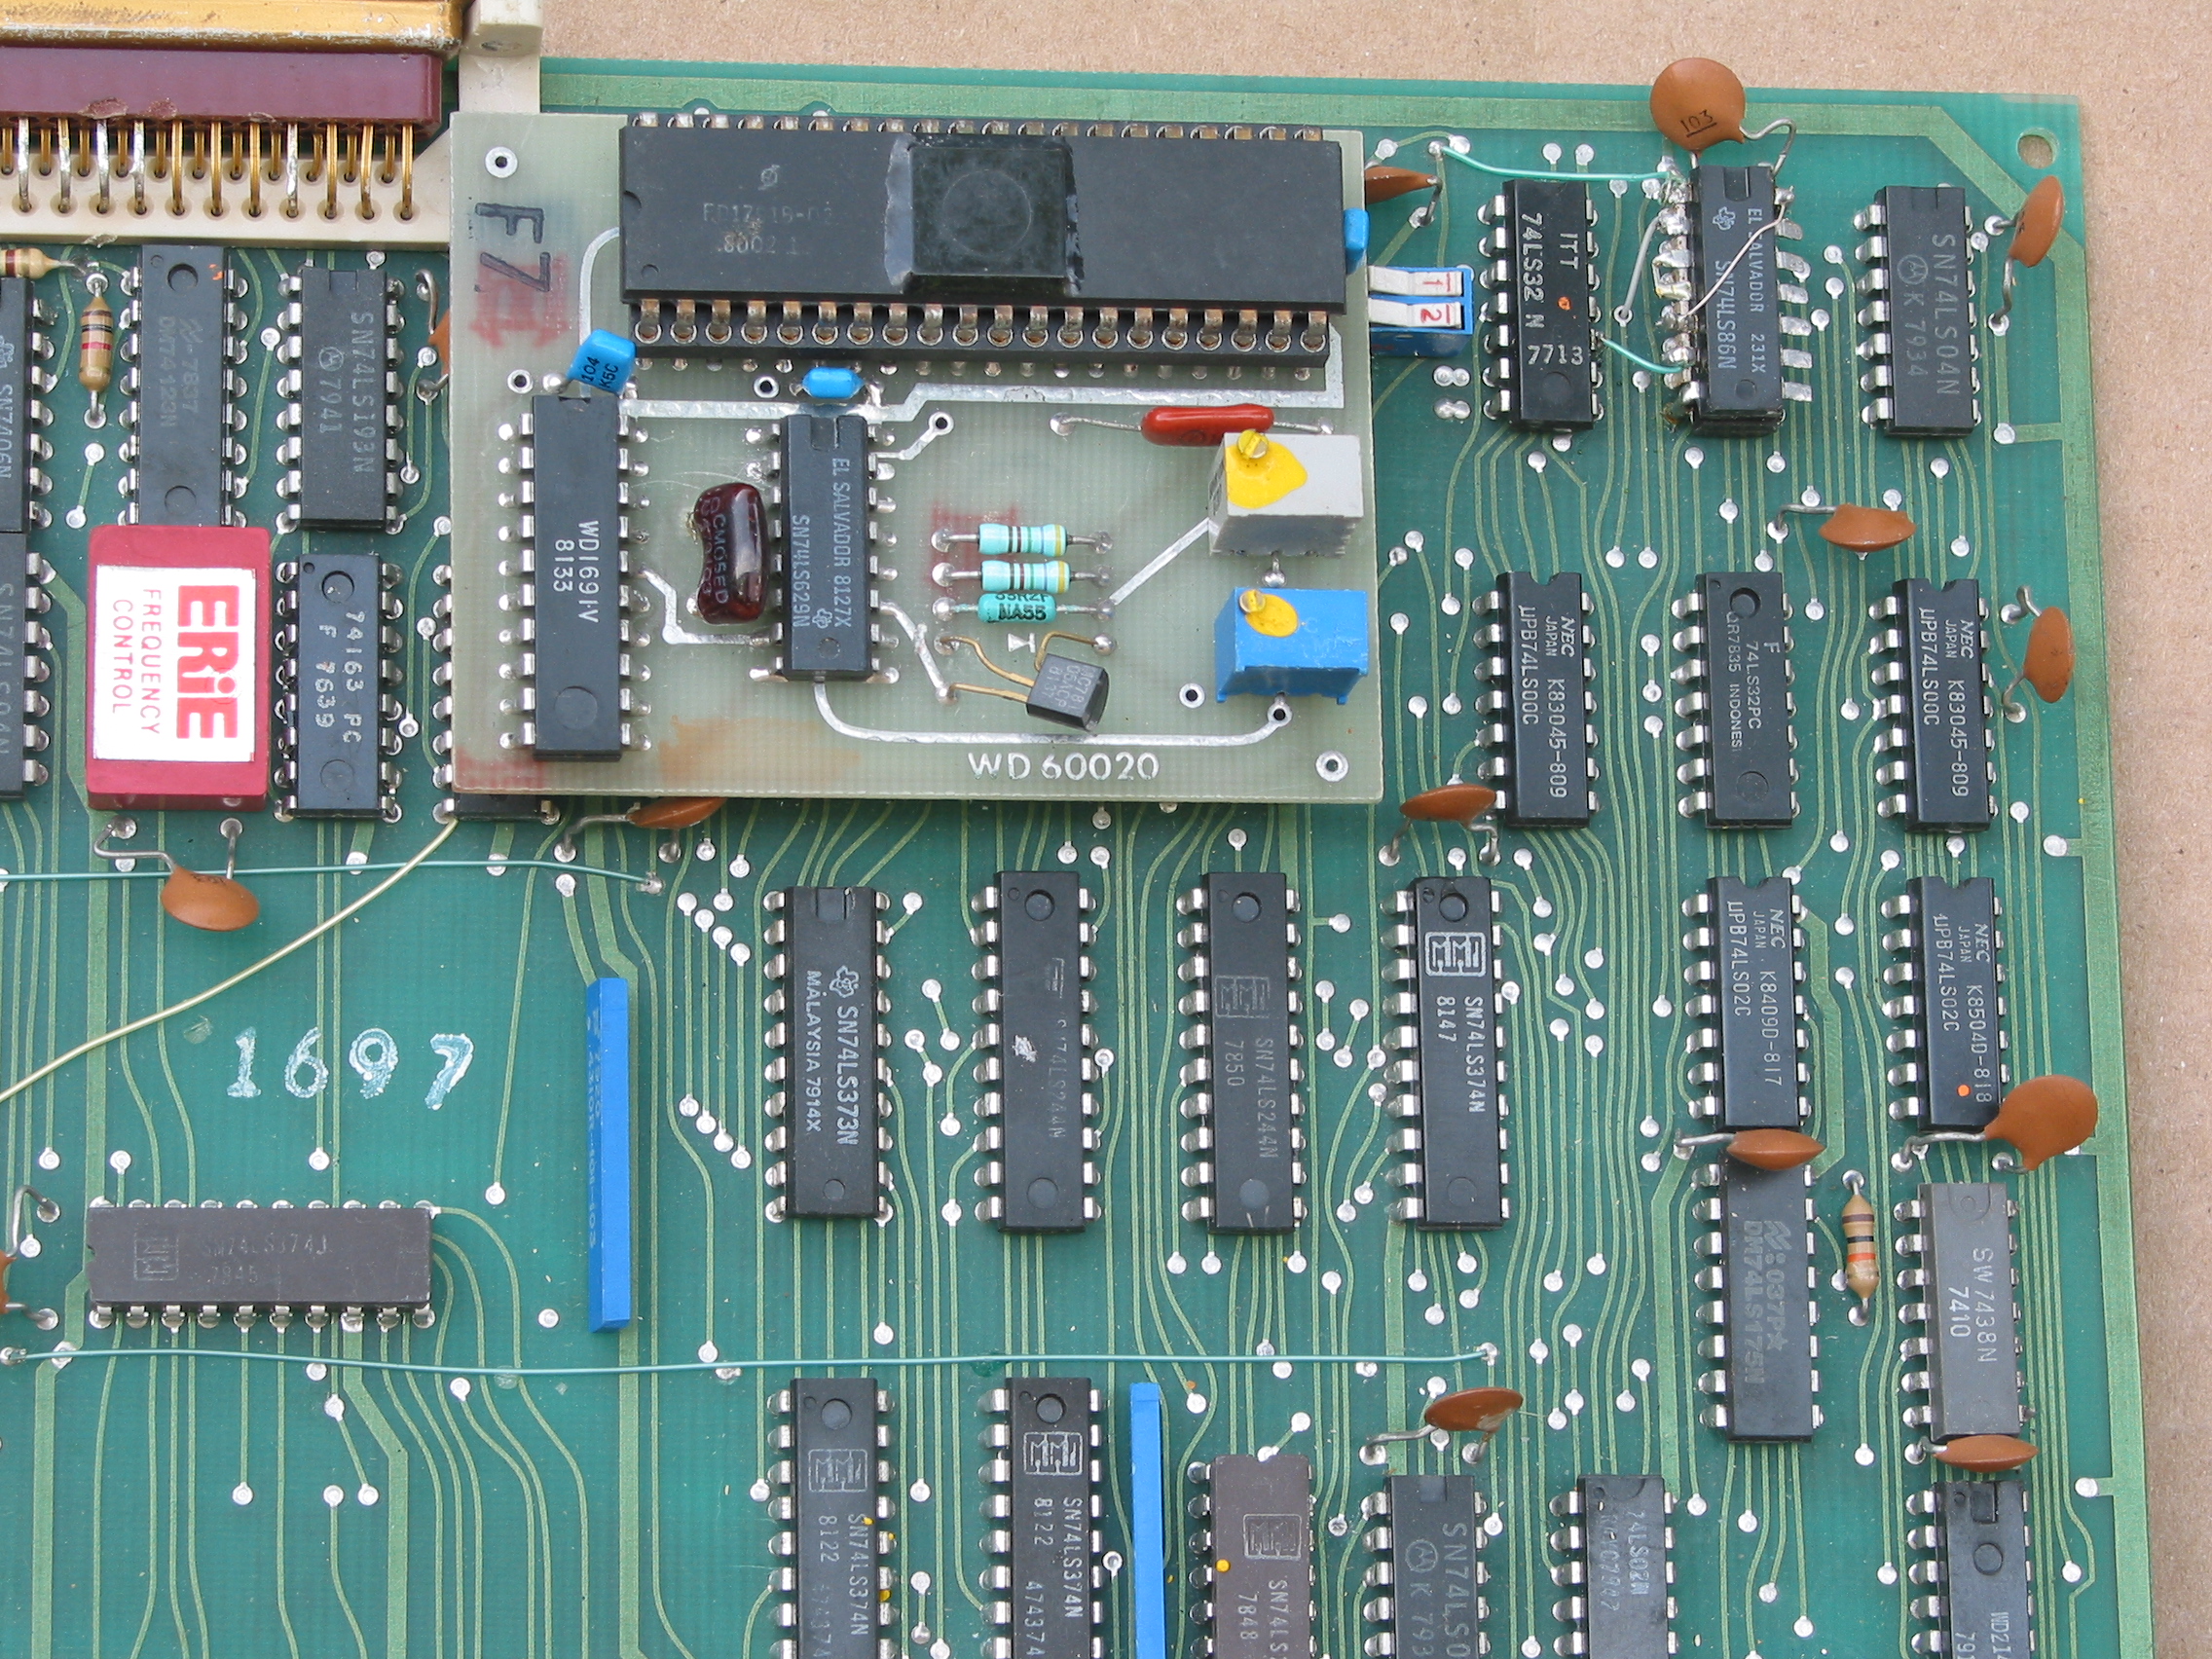 WD/900 component side, upper right corner, showing floppy disk controller